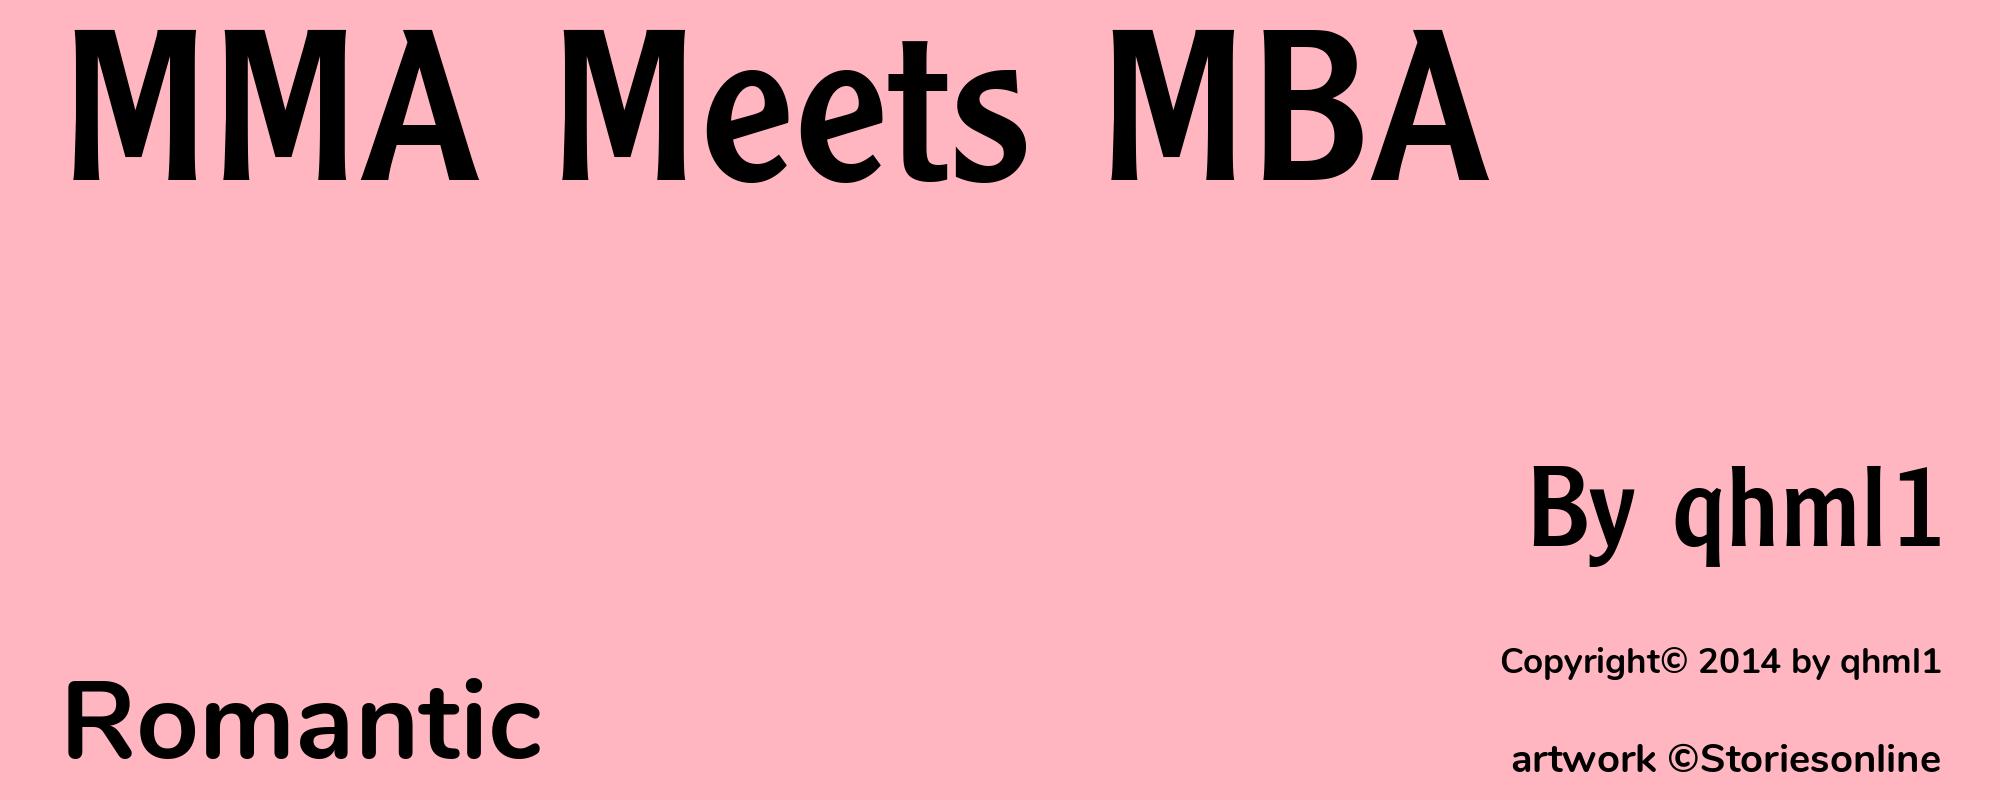 MMA Meets MBA - Cover